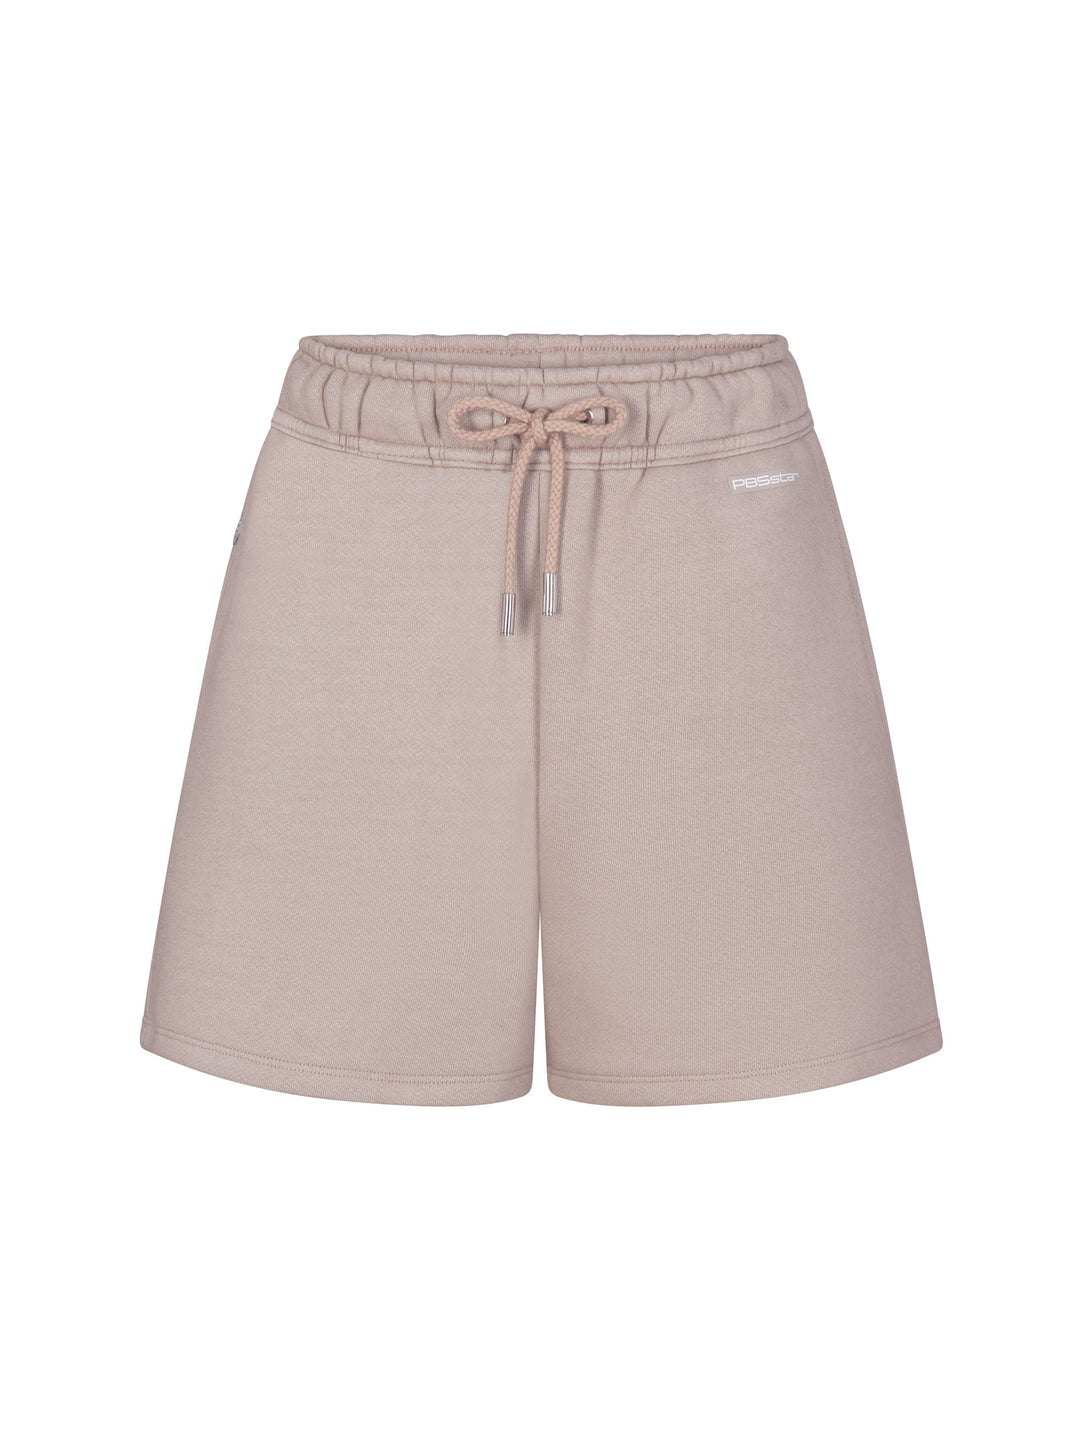 Women's Luxe Lounge Short front view in soft clay.